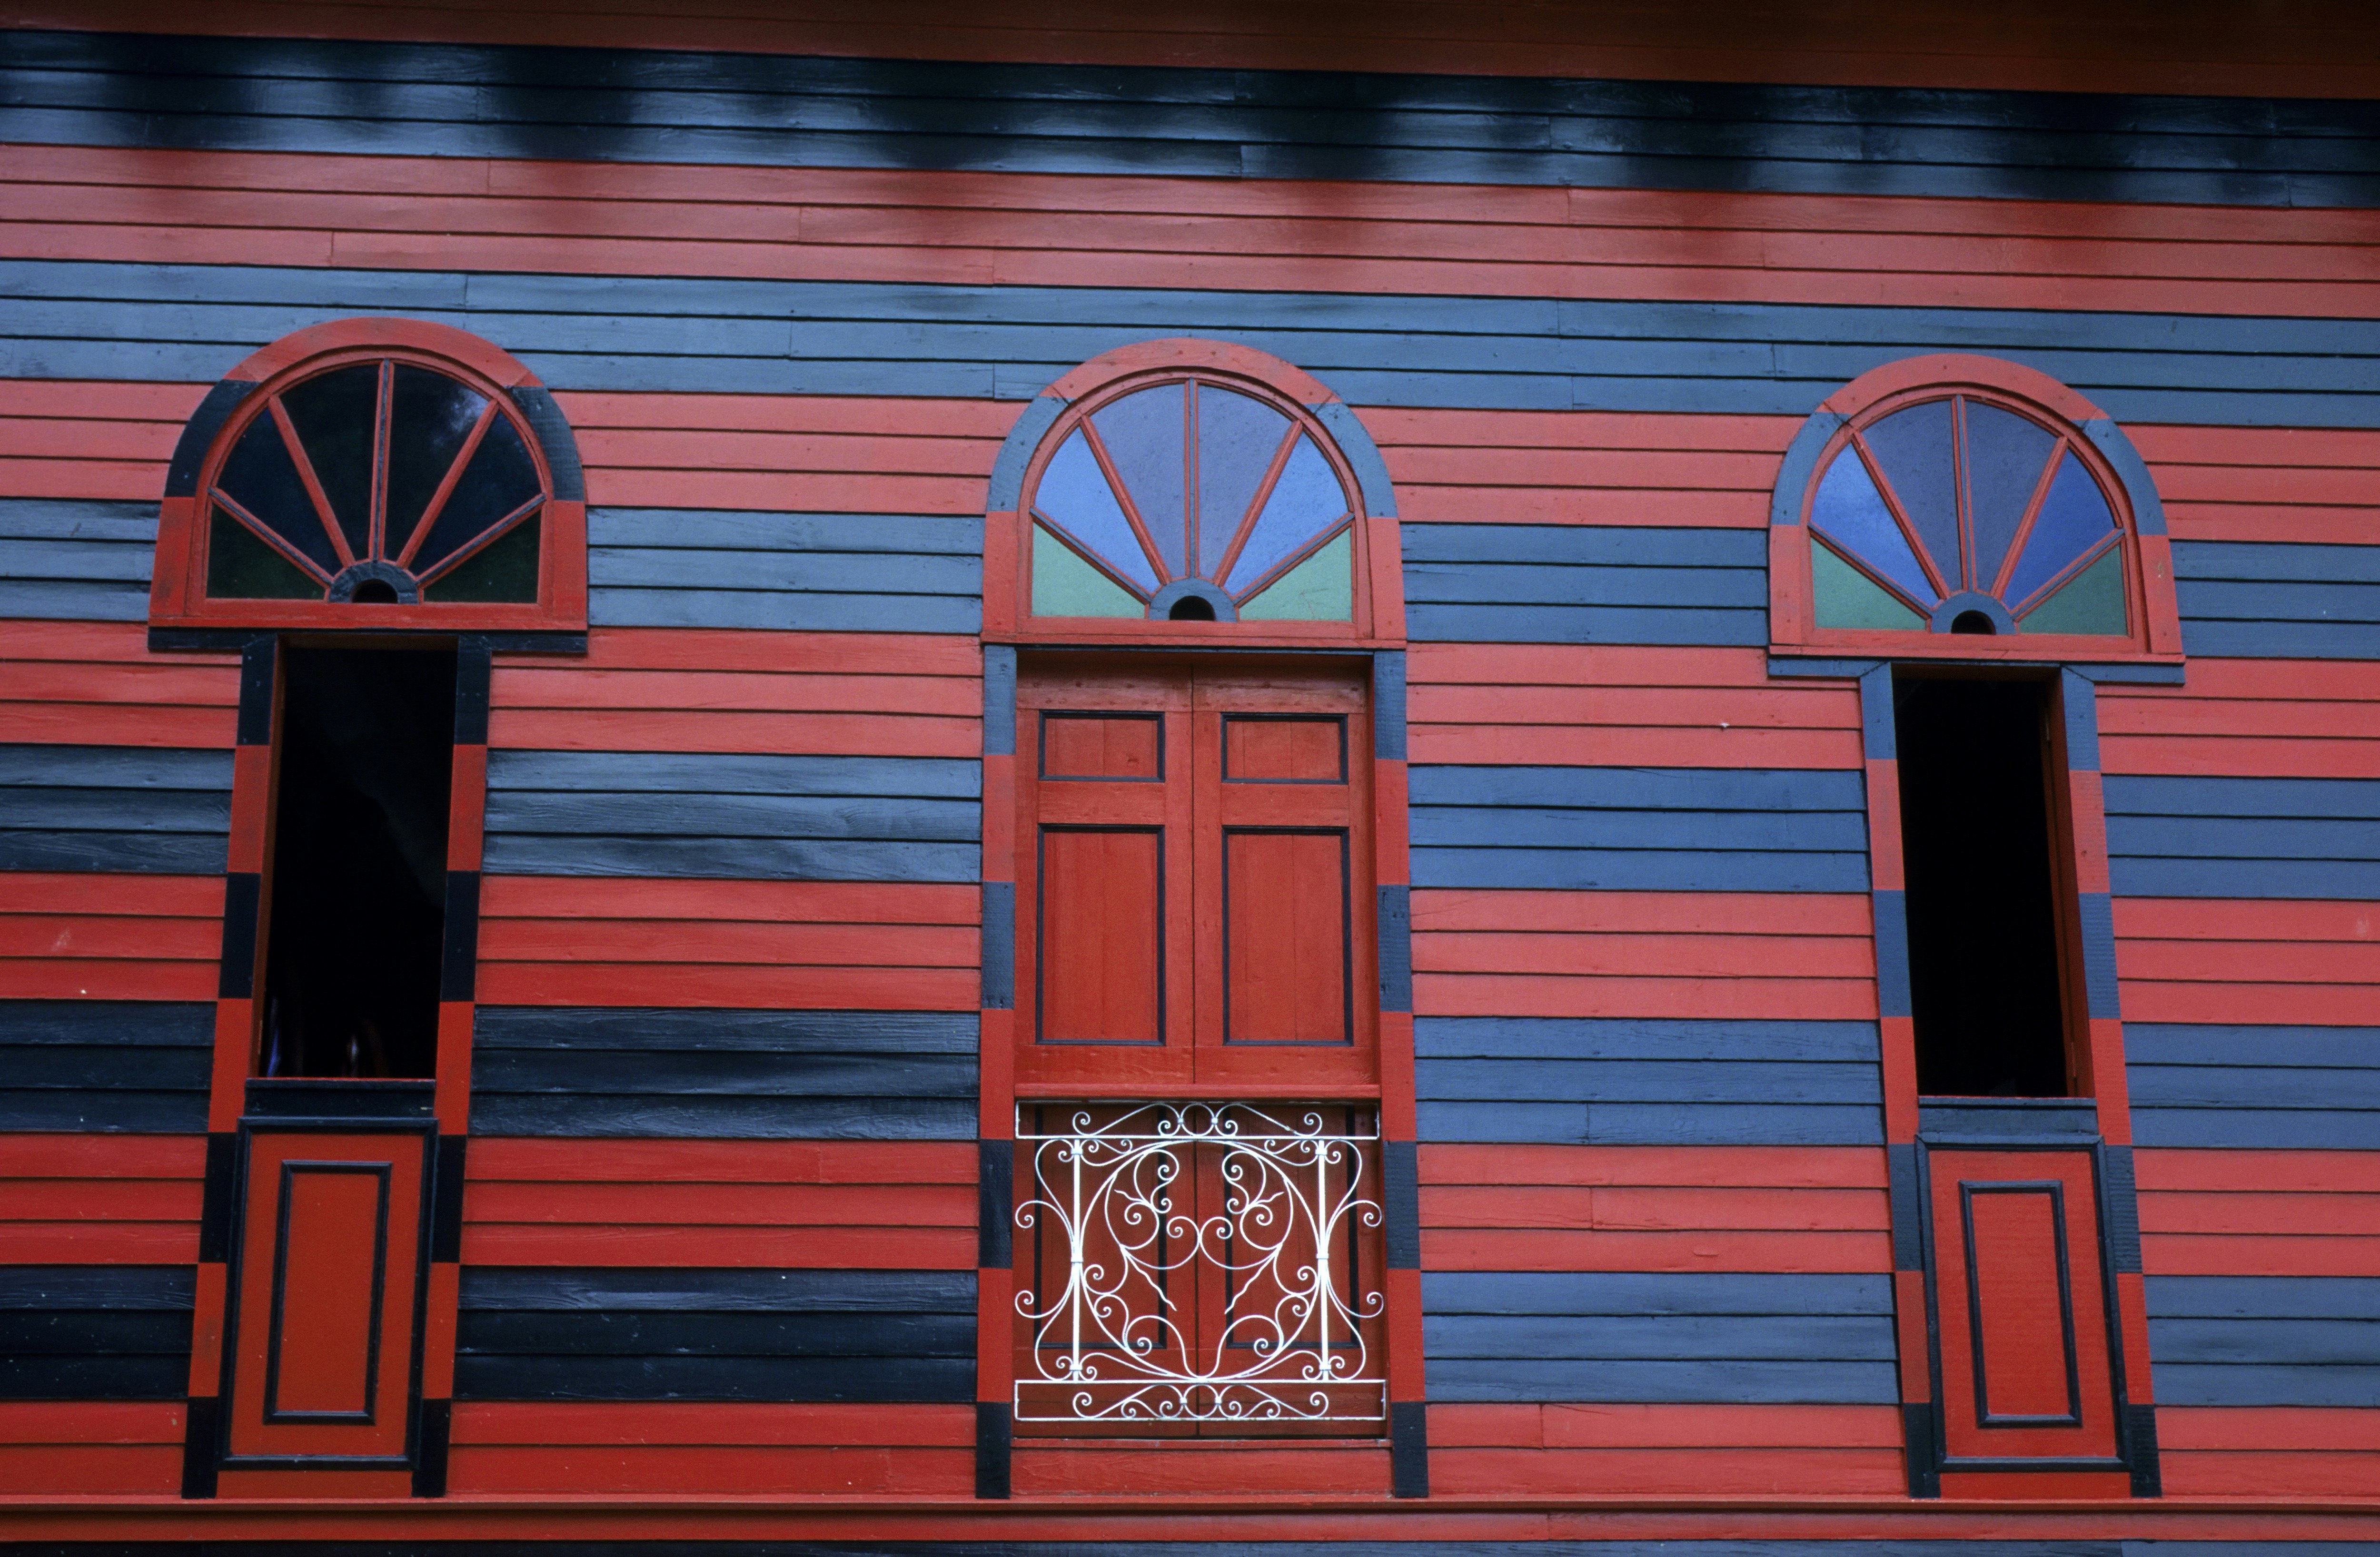 Close-up of a red-and-navy striped building facade with fan-shaped ornamental windows in Ponce, Puerto Rico